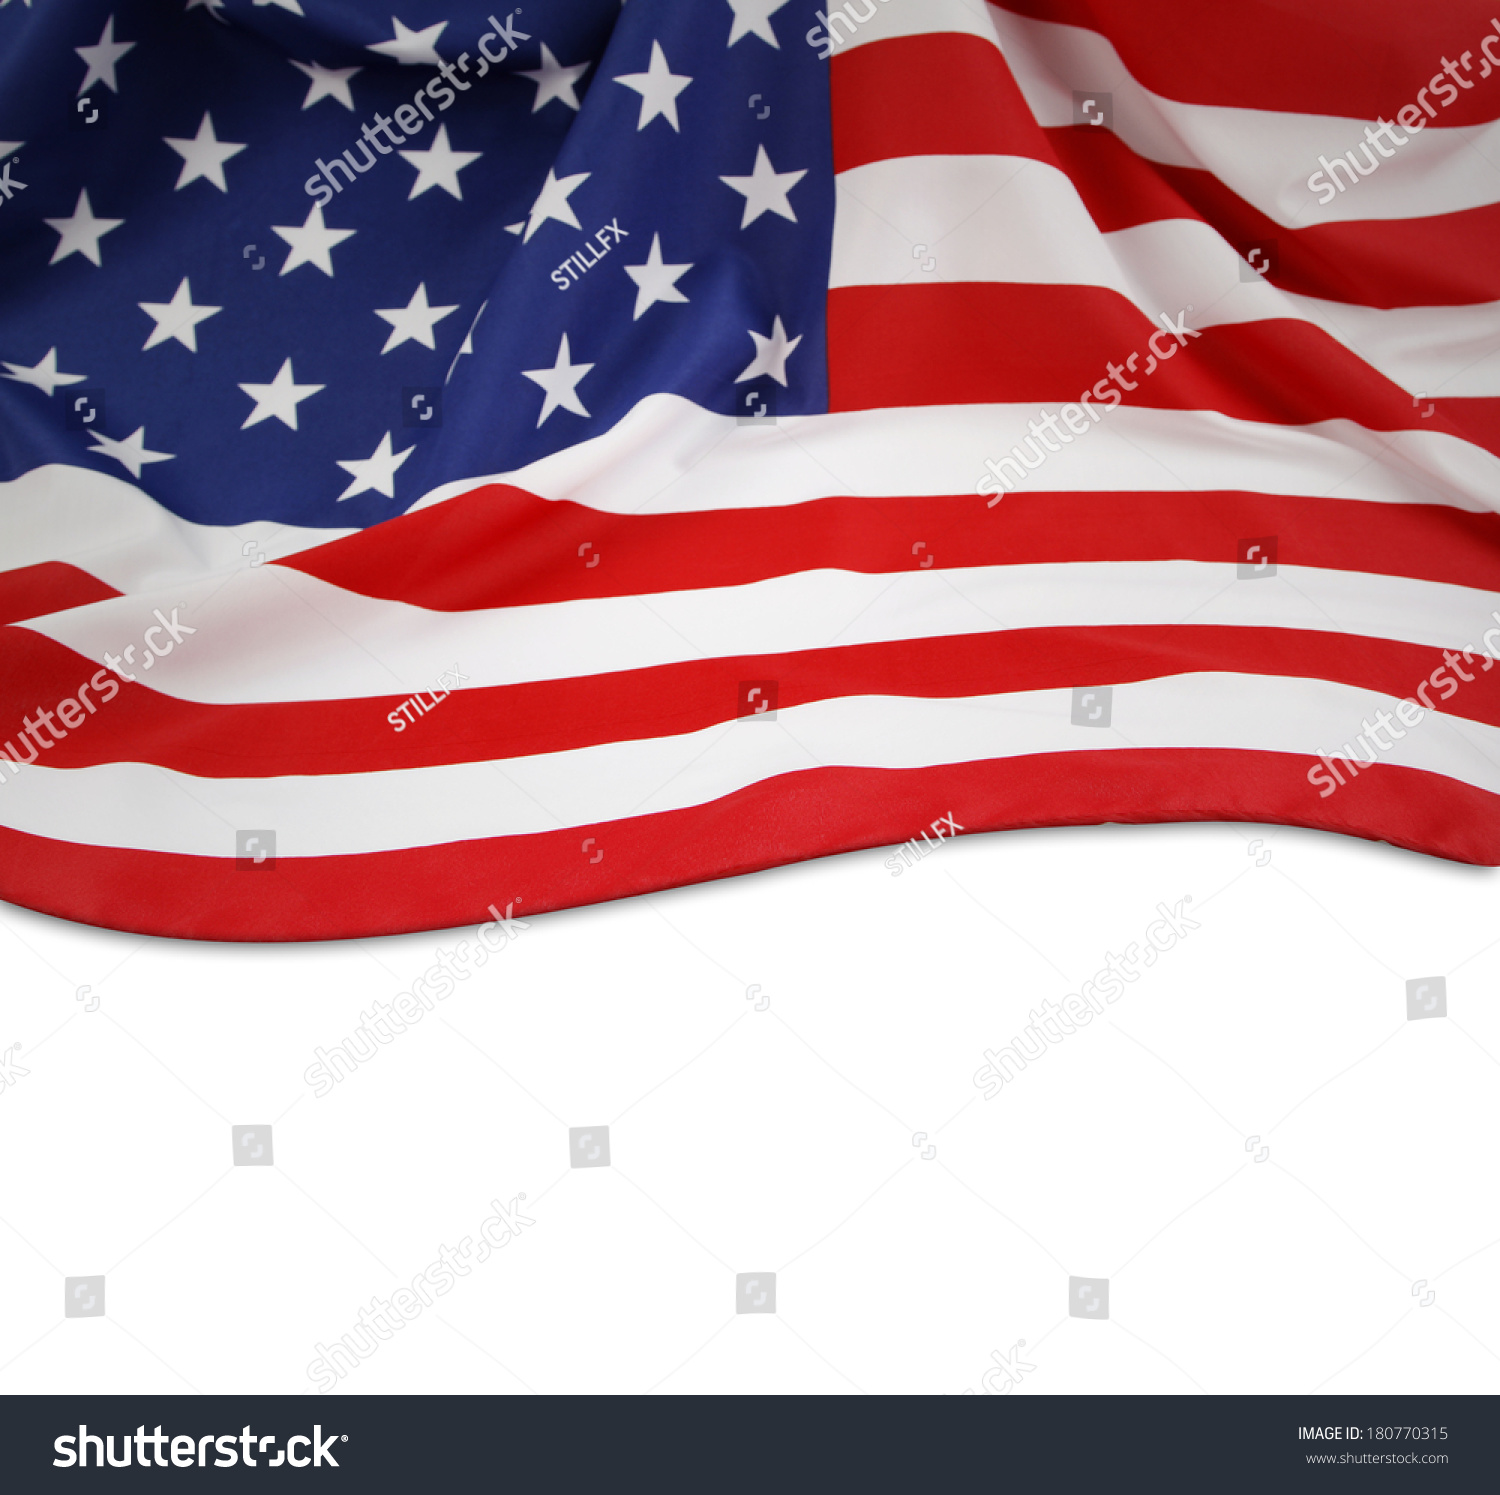 Closeup Of American Flag On Plain Background Stock Photo 180770315 ...